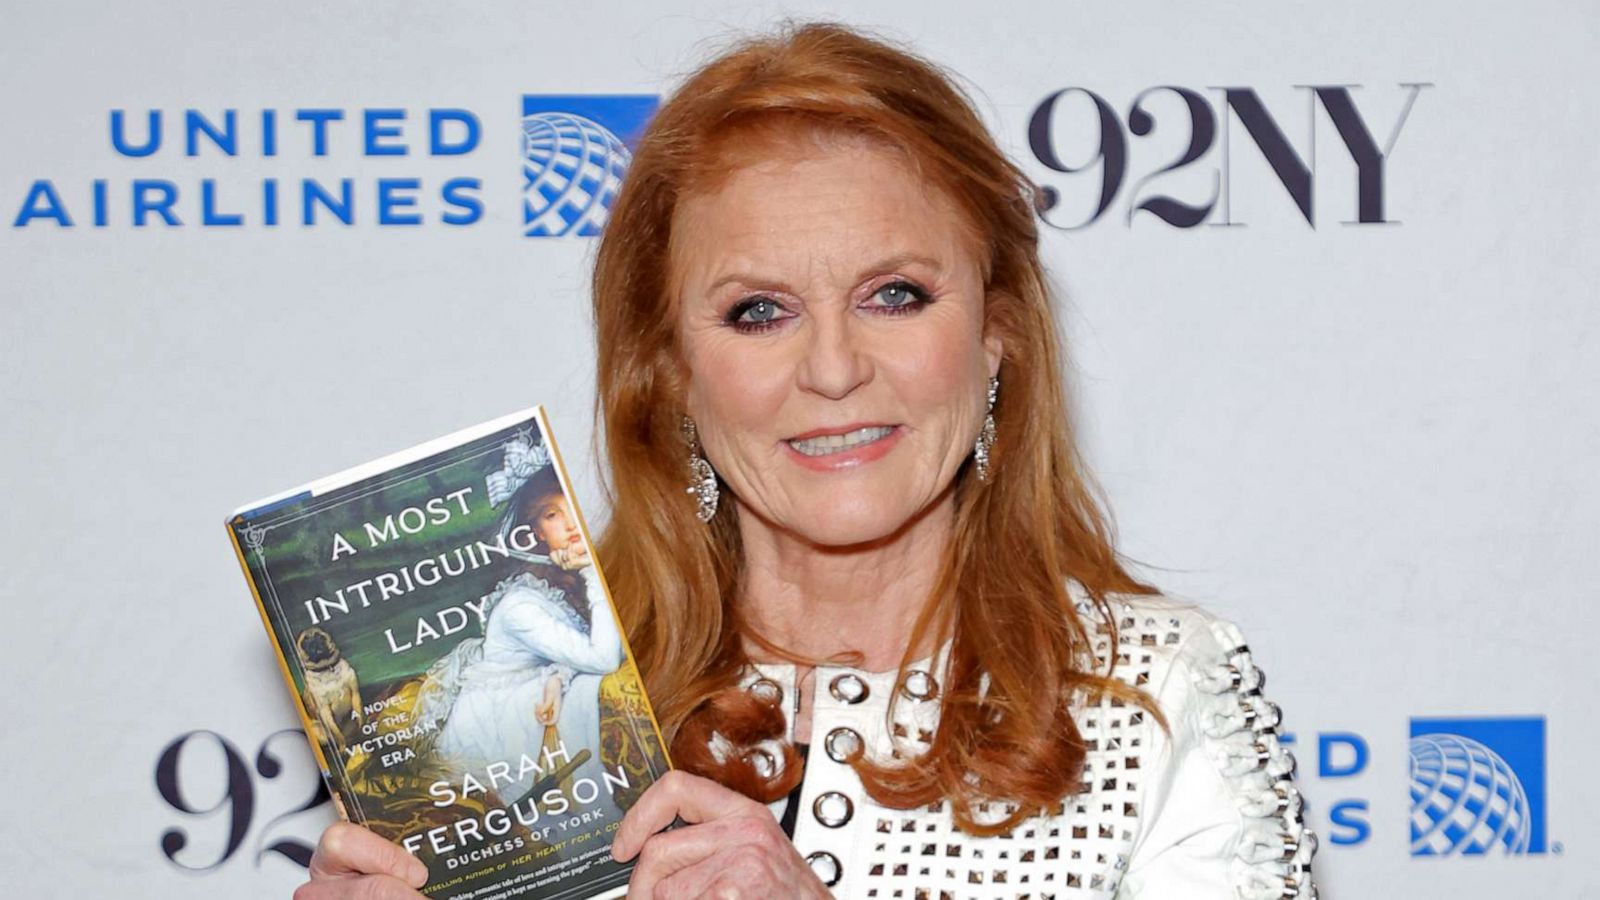 Sarah Ferguson says she feels liberated after death of Queen Elizabeth pic